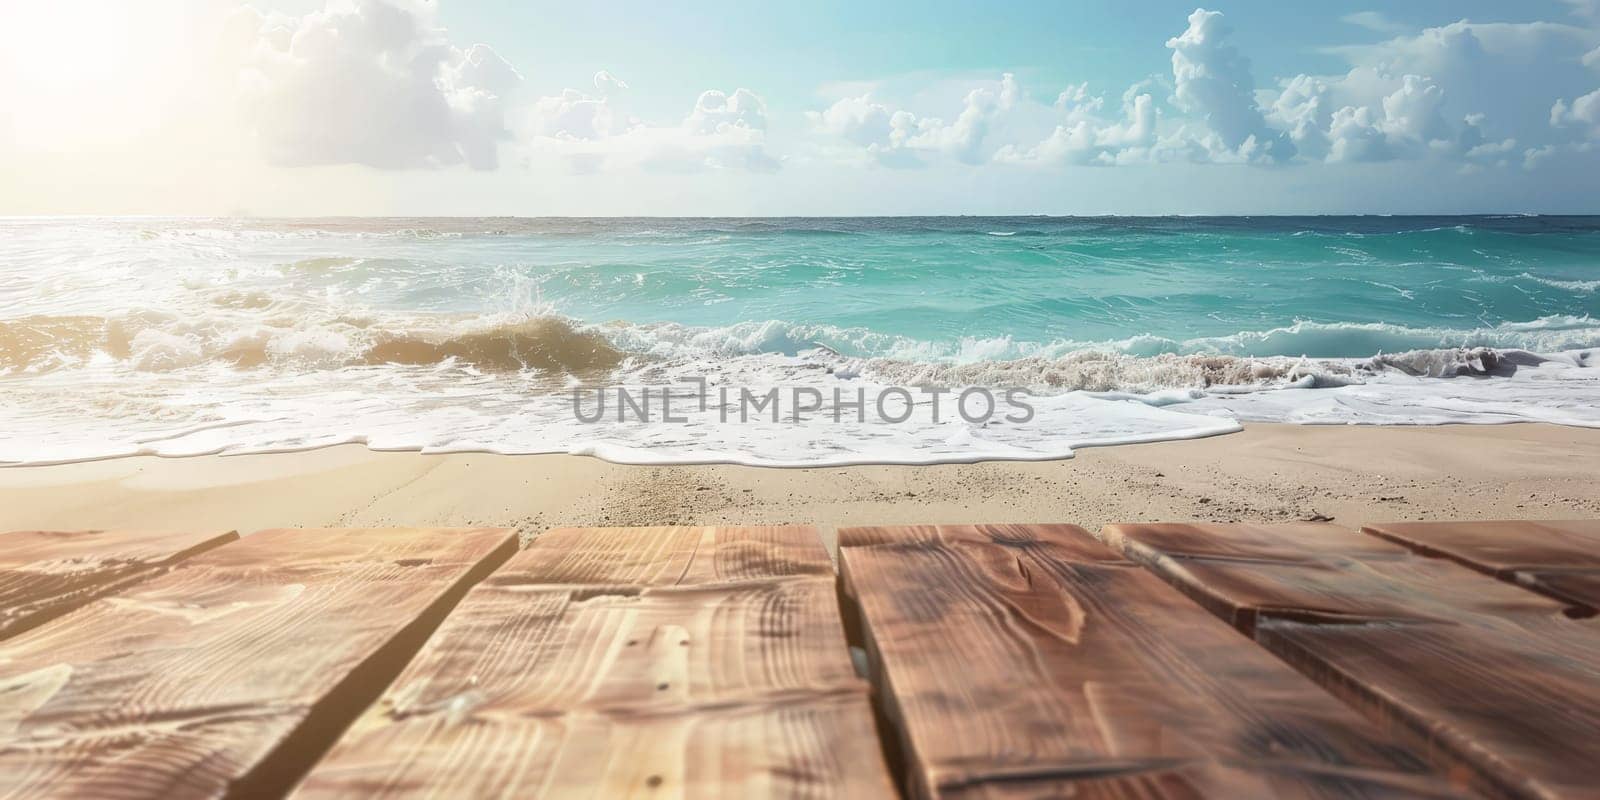 A wooden board is on the beach with the ocean in the background by nateemee